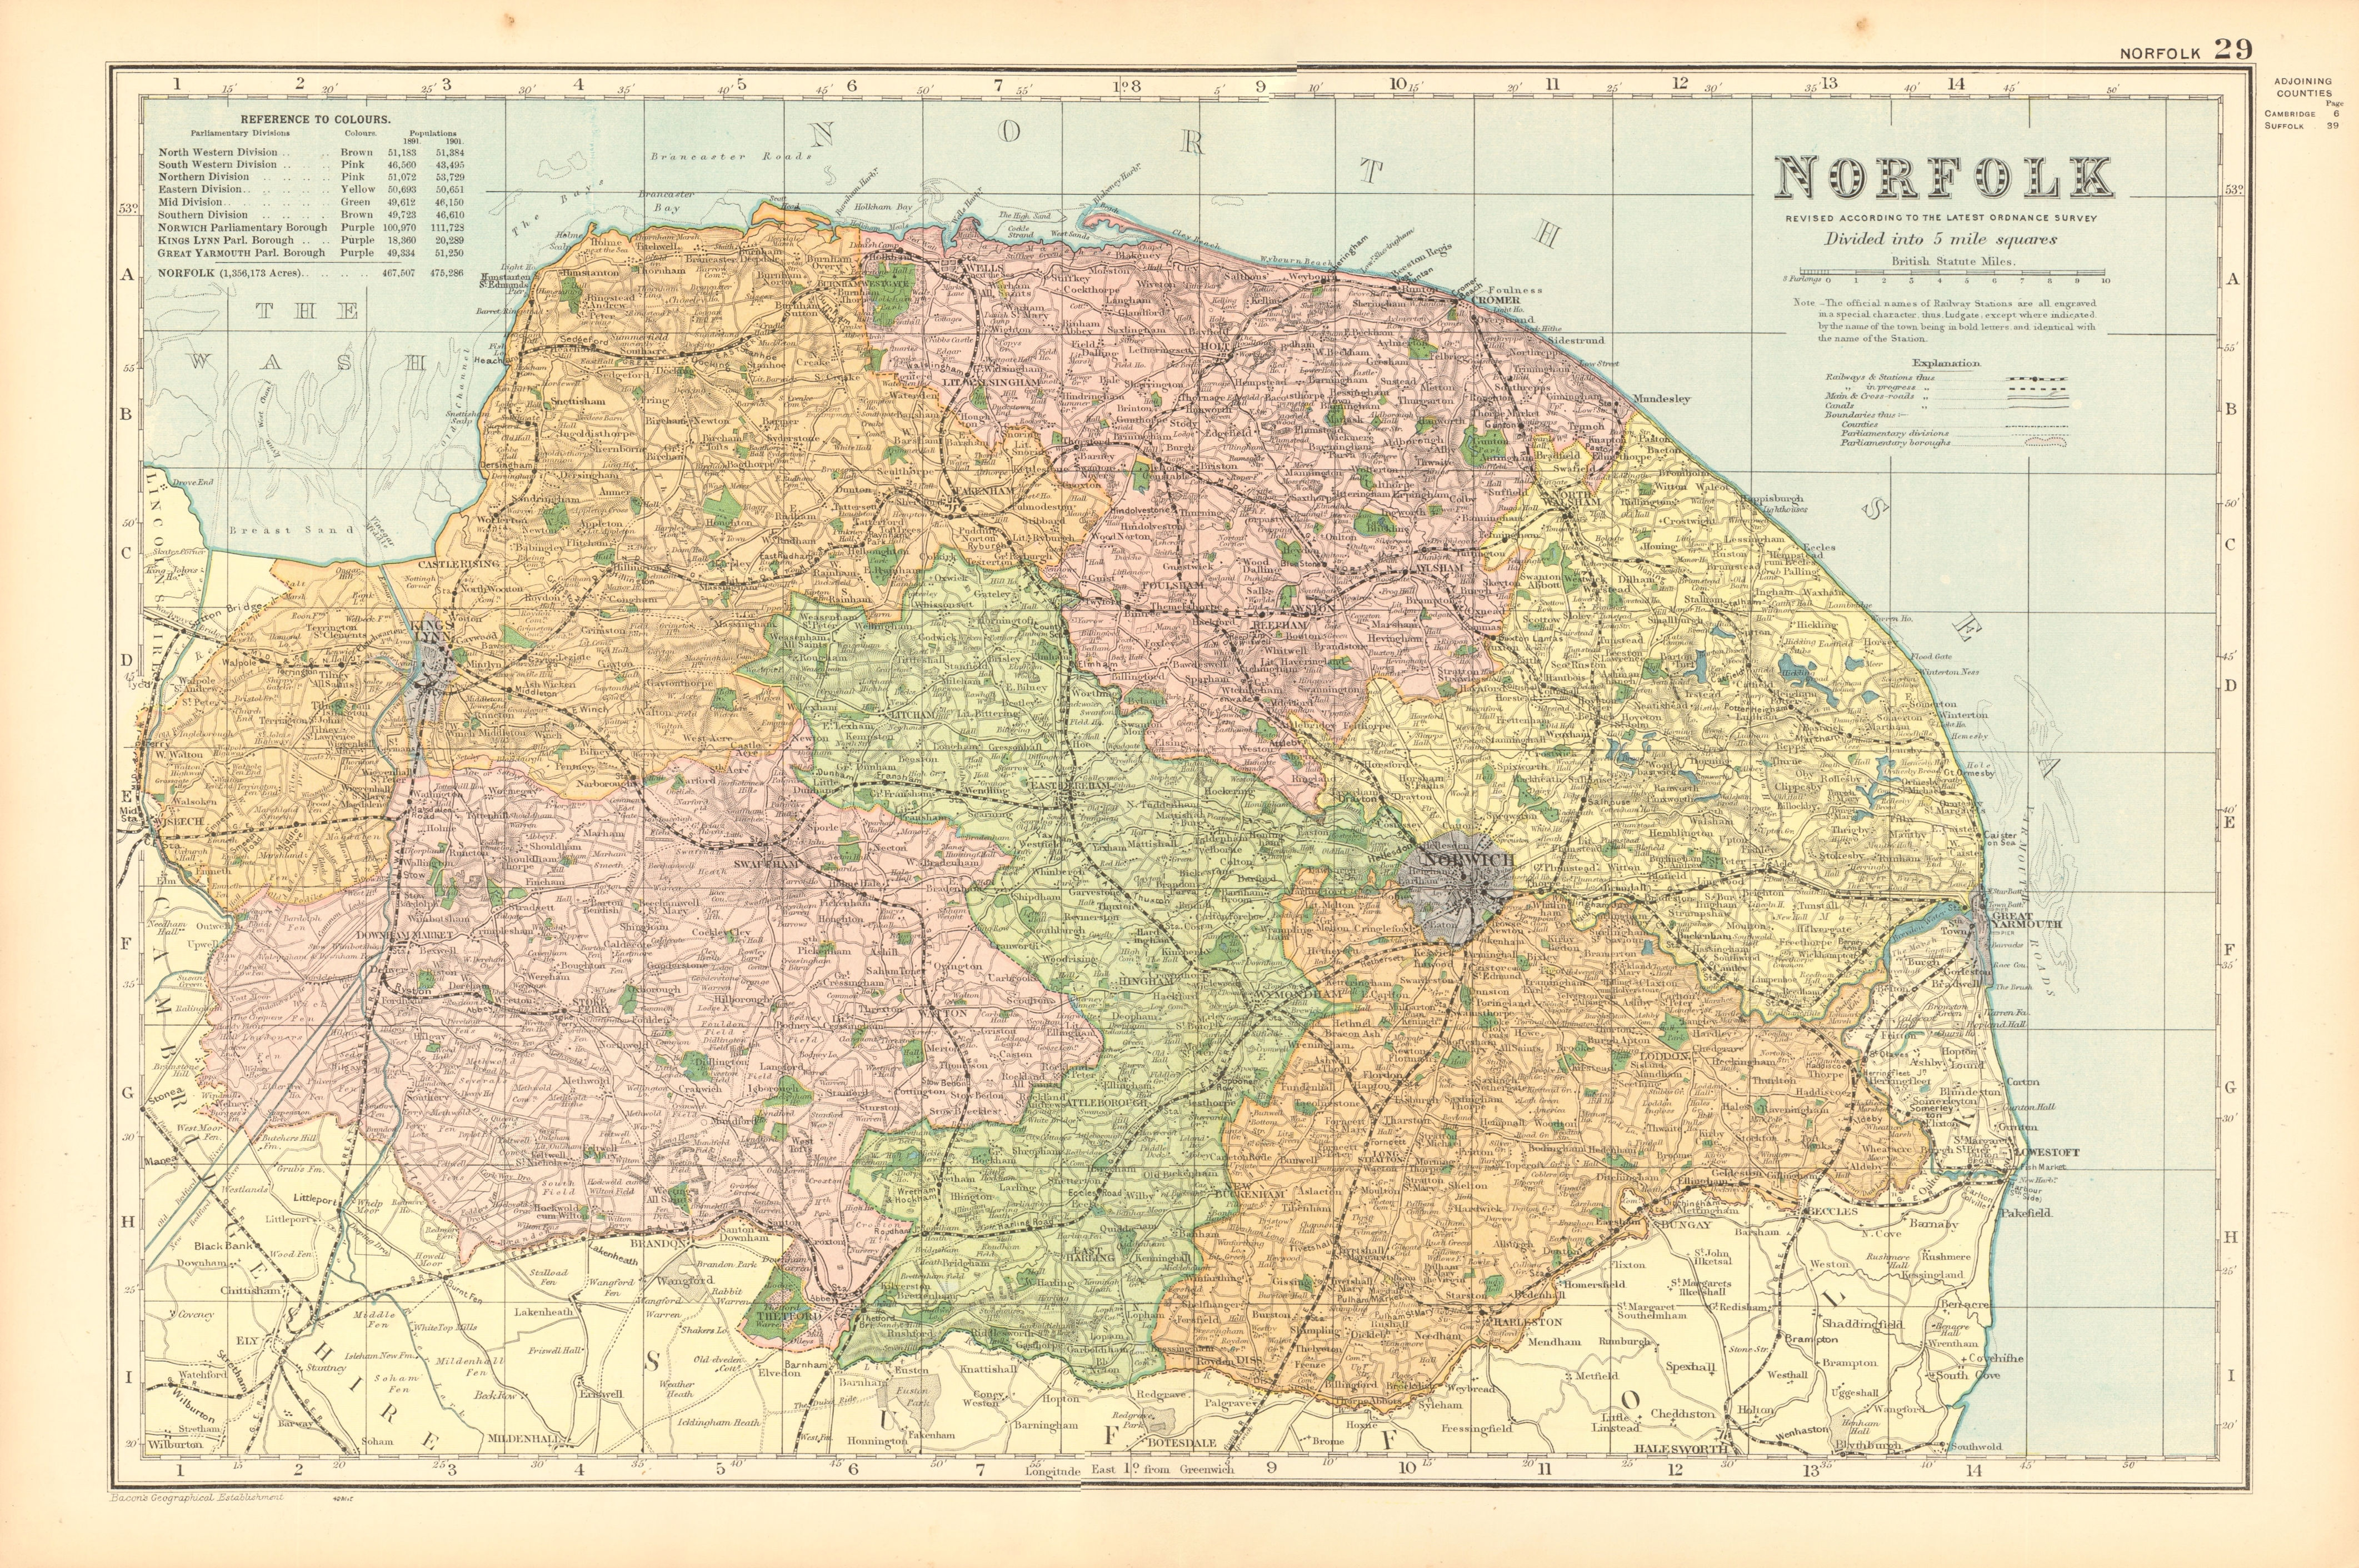 Associate Product NORFOLK. Showing Parliamentary divisions, boroughs & parks. BACON 1904 old map